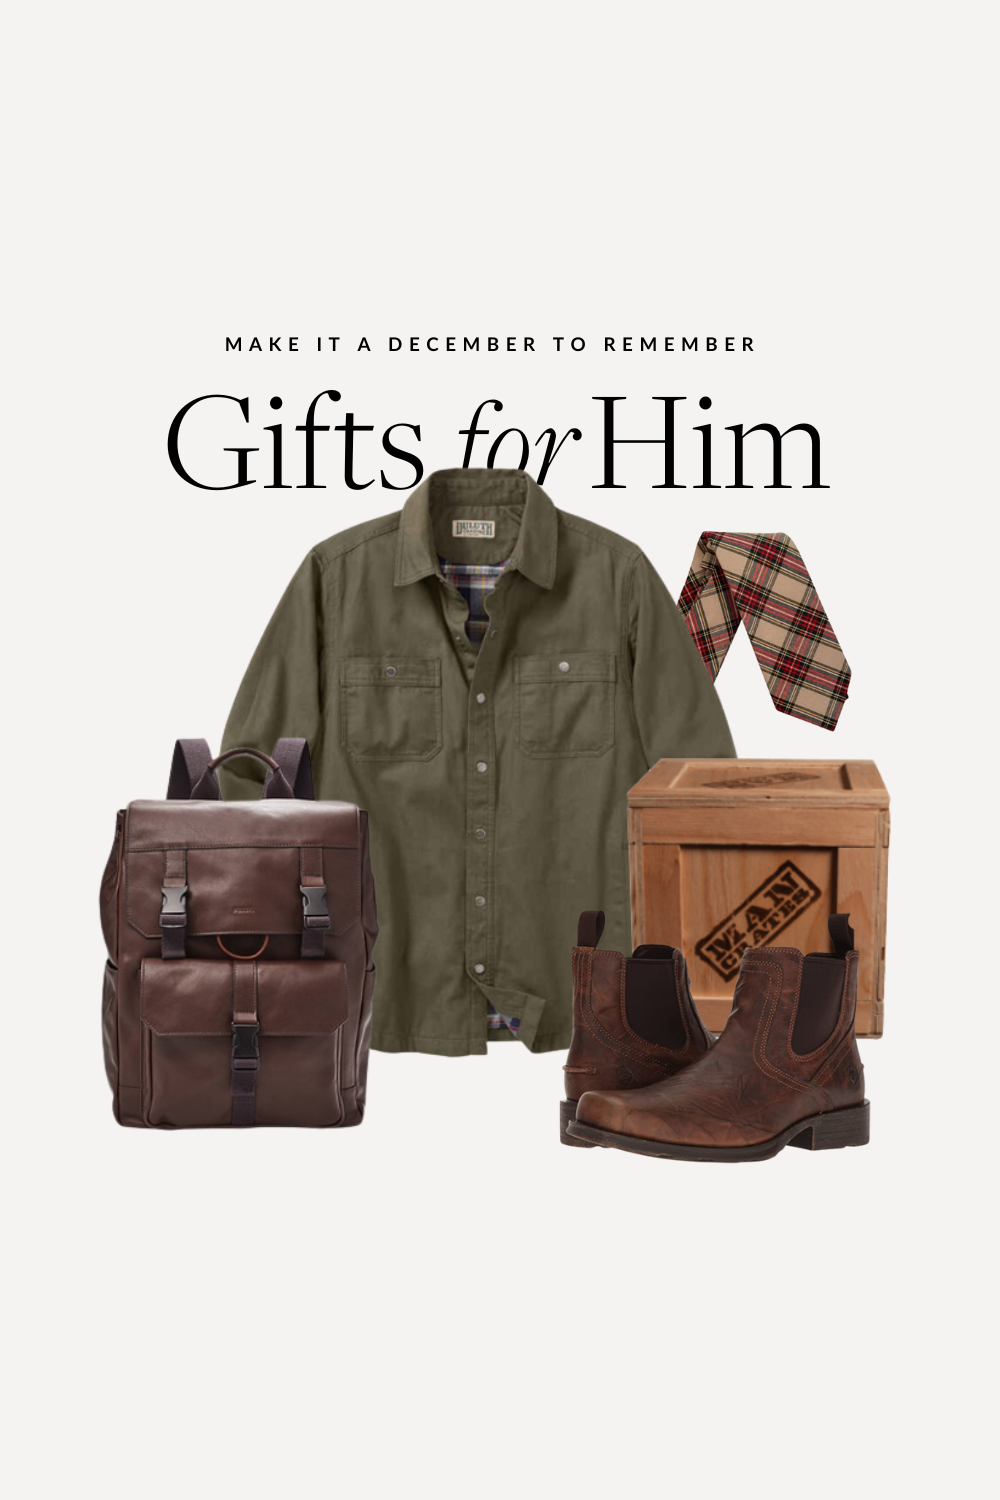 Holiday gift guide & stocking stuffer inspiration for him this holiday season! It's my 2022 gift guide for him and I hope you find something you would love to give or get this Christmas season! Be sure and catch the full Gift Guide Week over on KaraLayne.com!